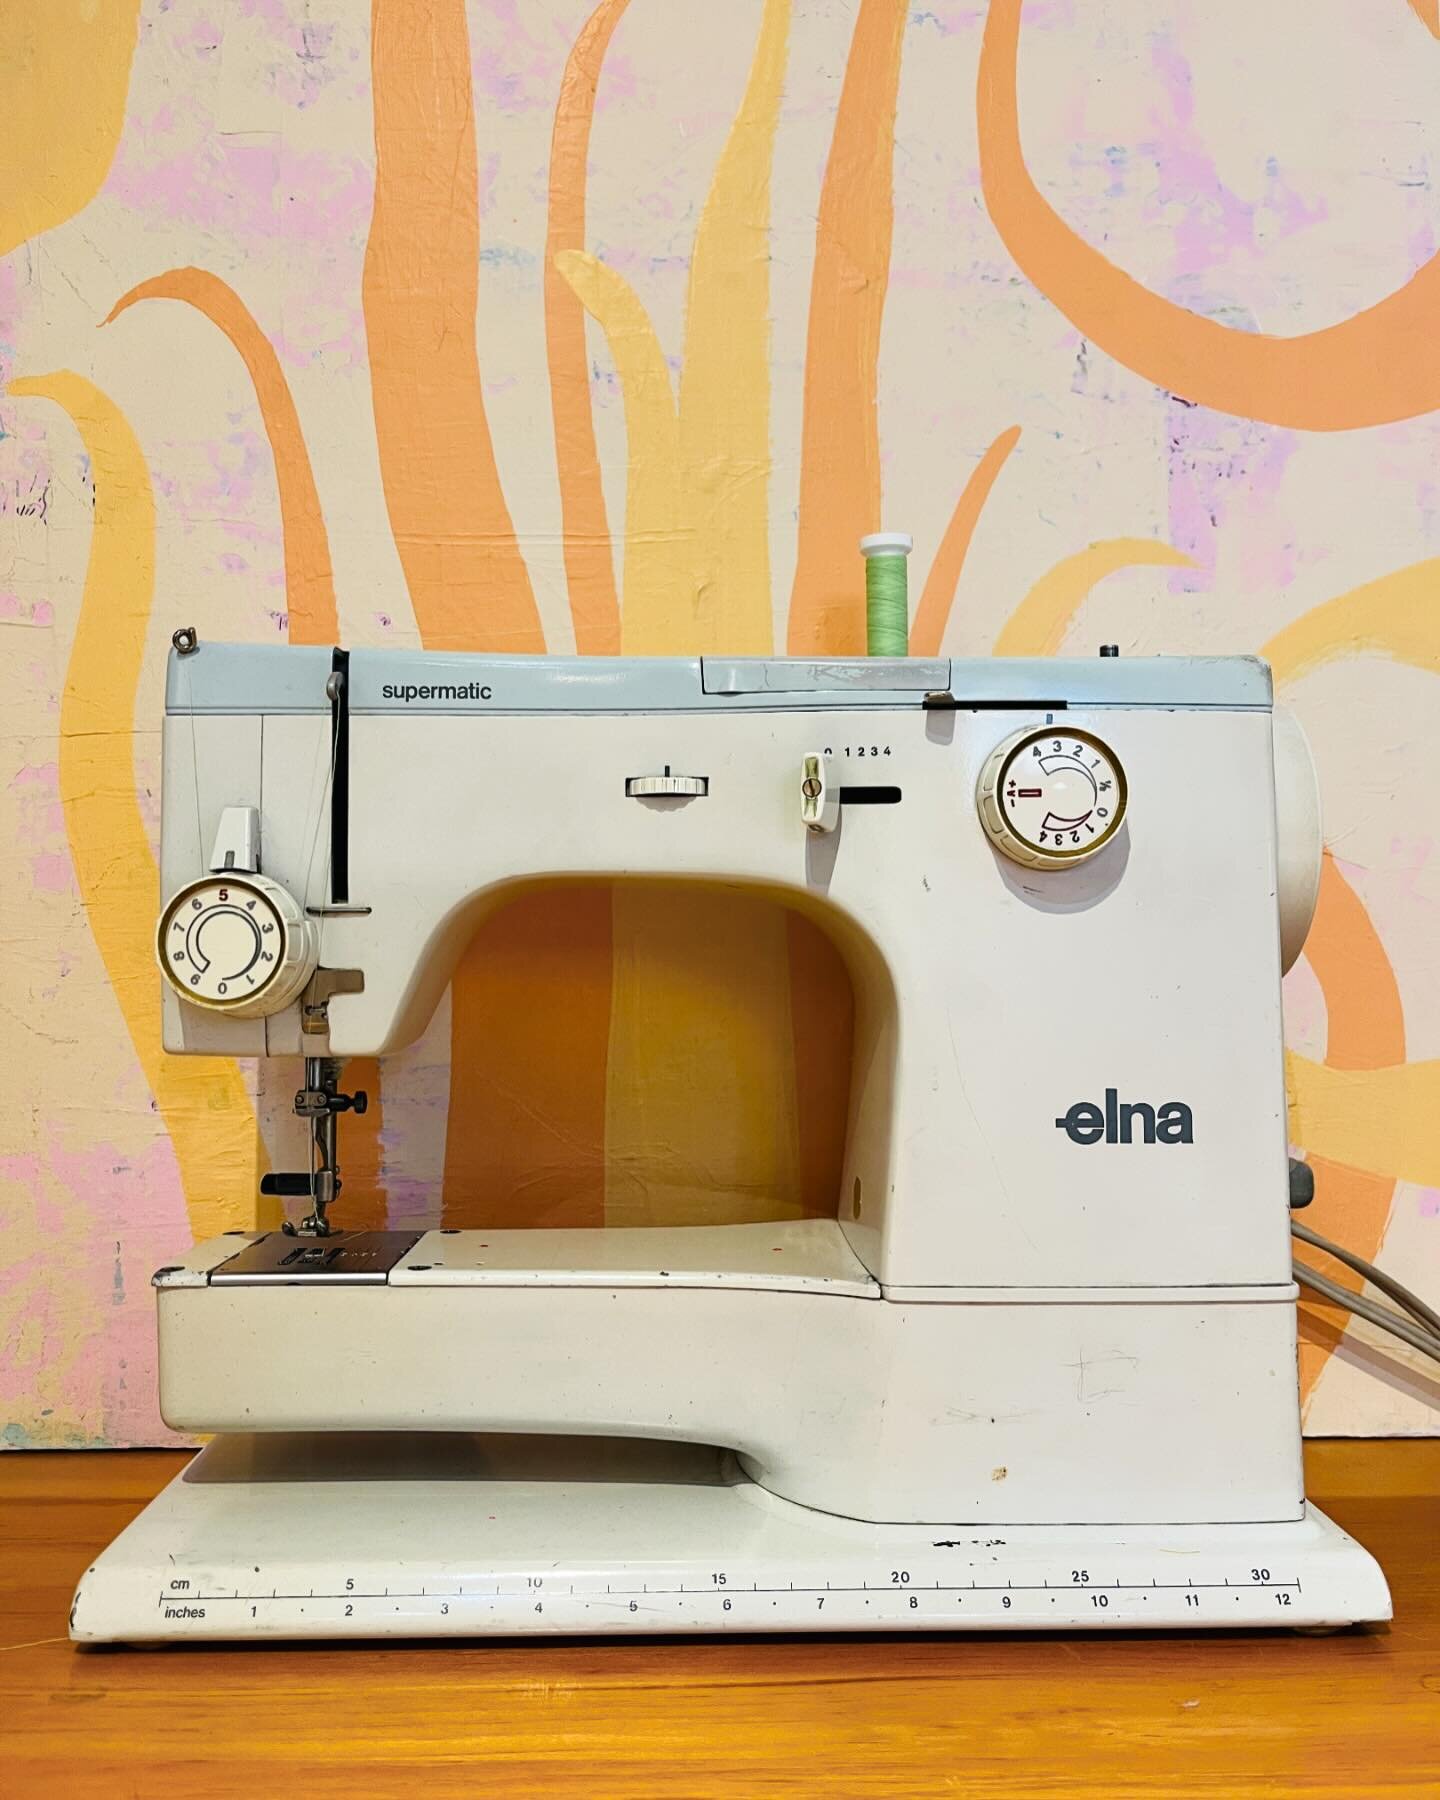 When I use a machine, I sew on this Elna Supermatic, circa 1952. It was my mom&rsquo;s machine. I learned on it in the late 70s. I have since inherited two newer, fancier machines from her and my MIL and I just prefer this one. It&rsquo;s like drivin